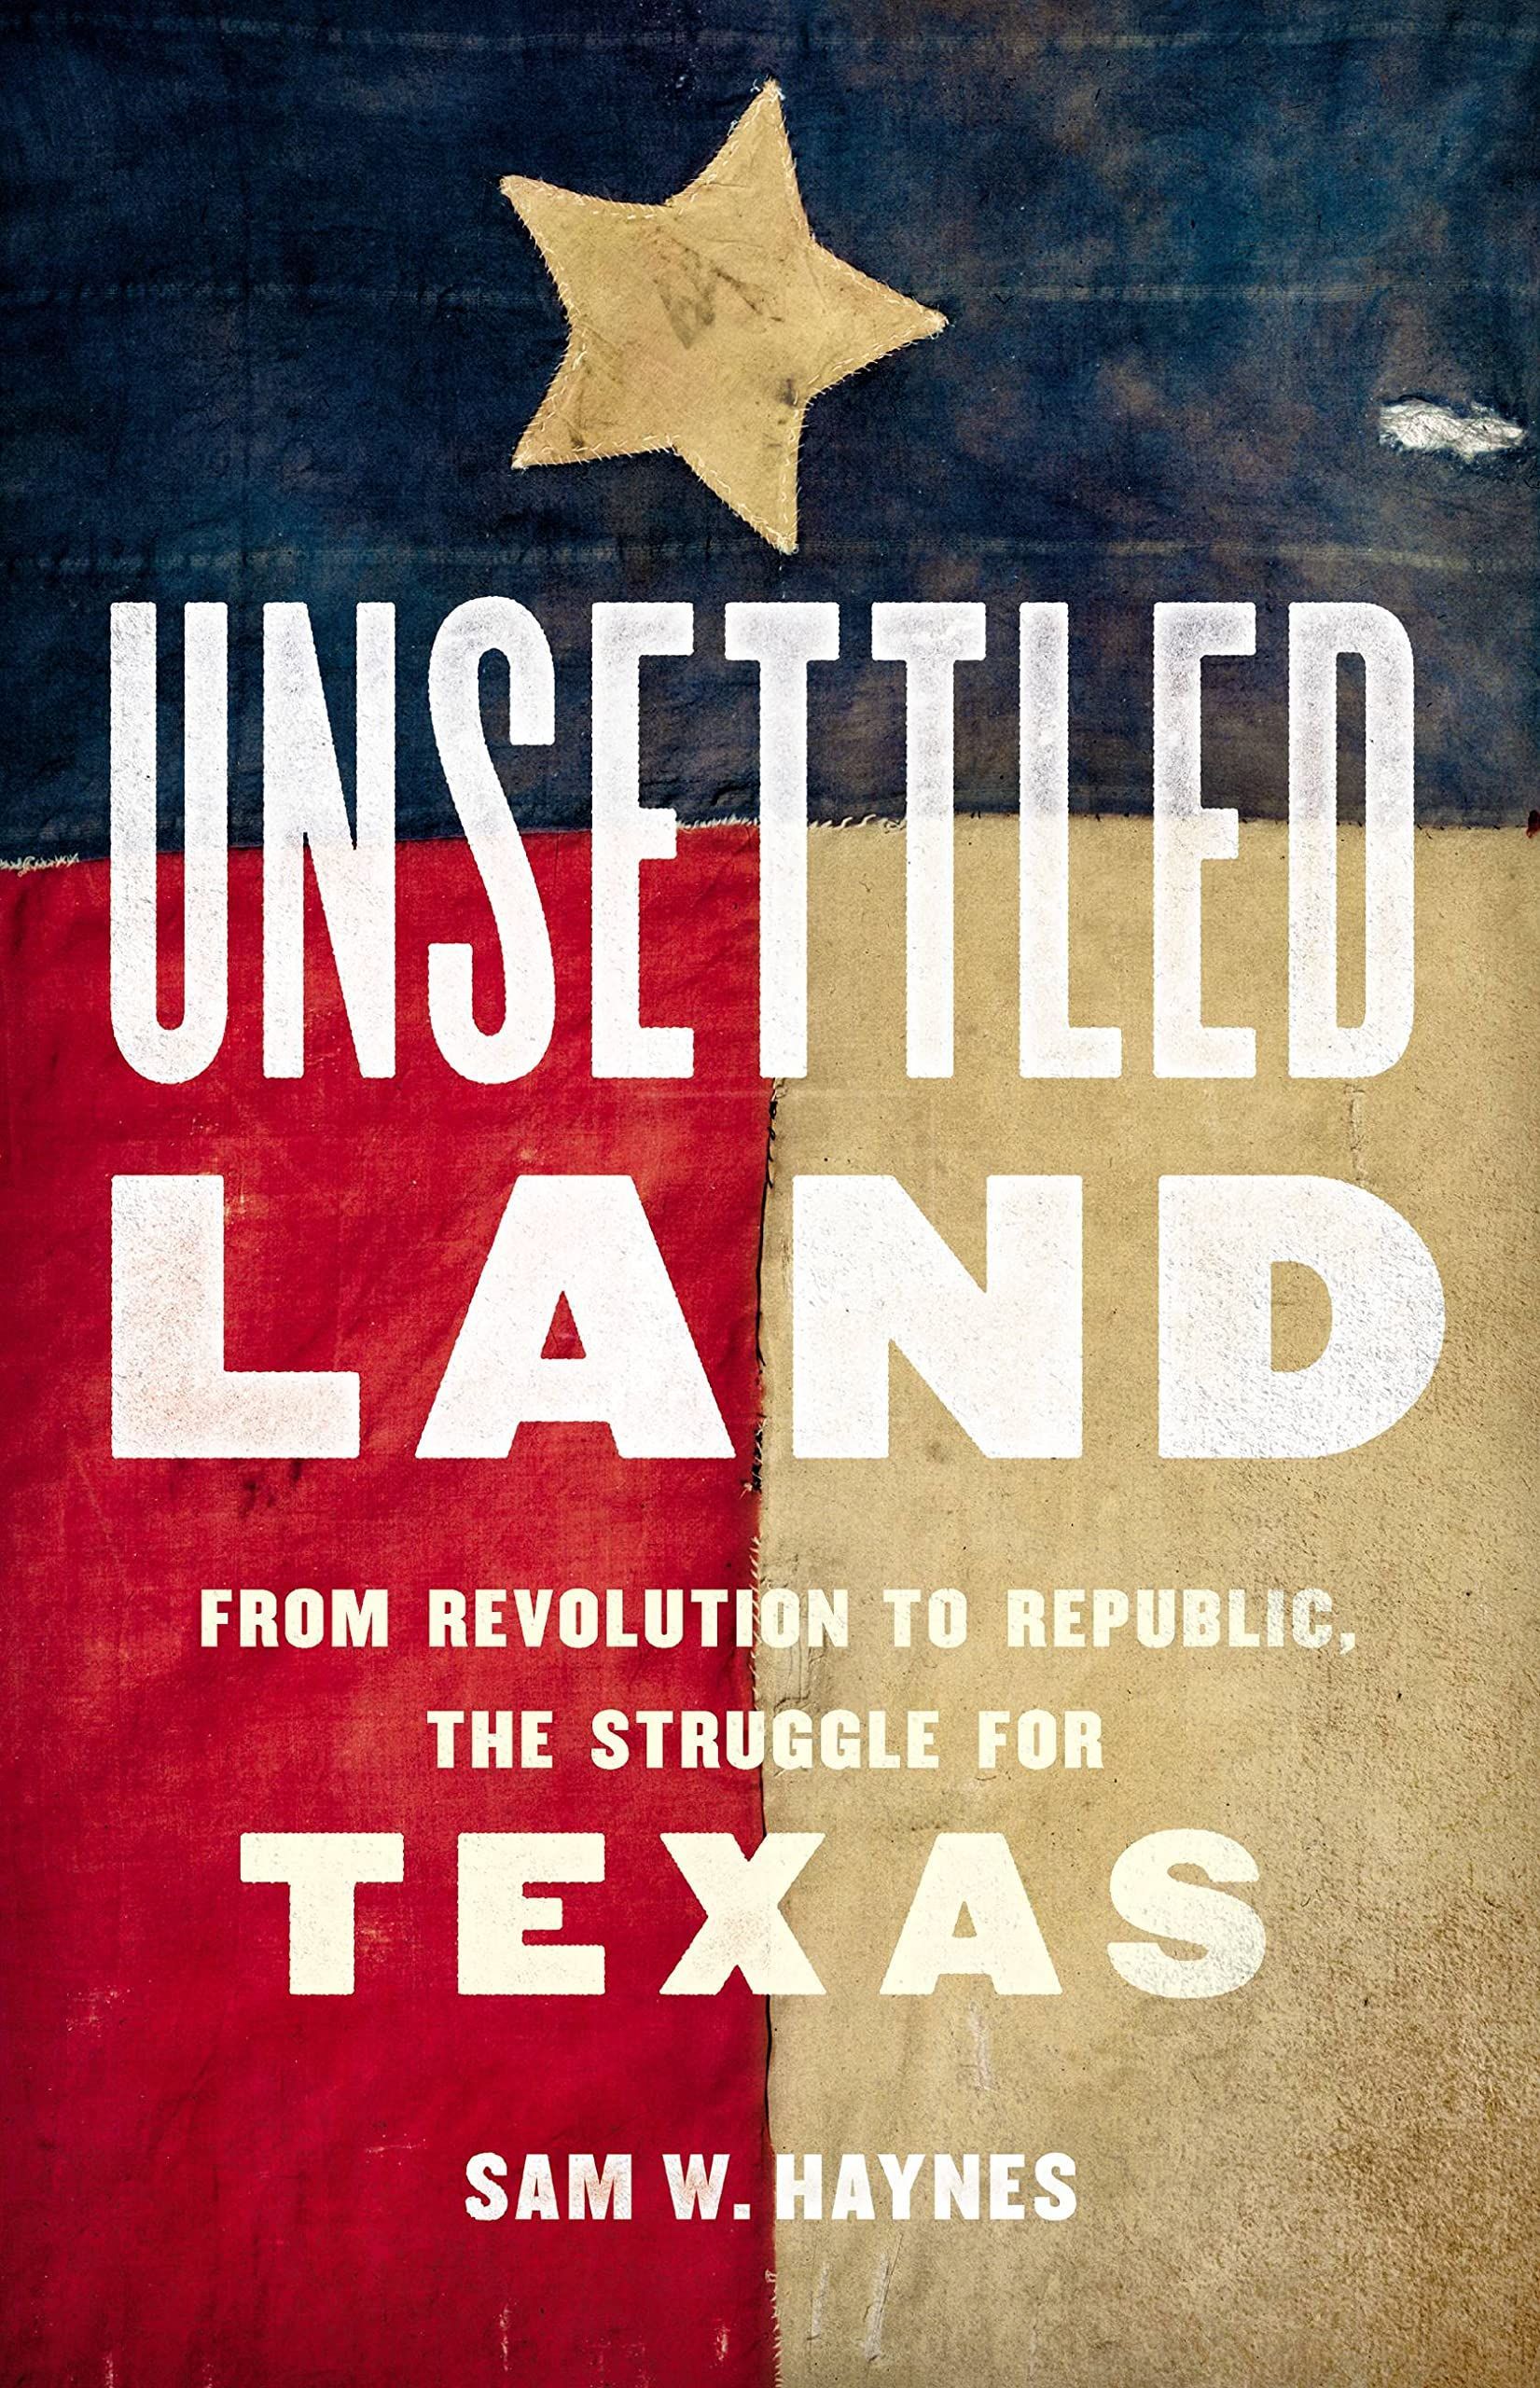 Gone to Texas: On Sam W. Haynes’s “Unsettled Land”